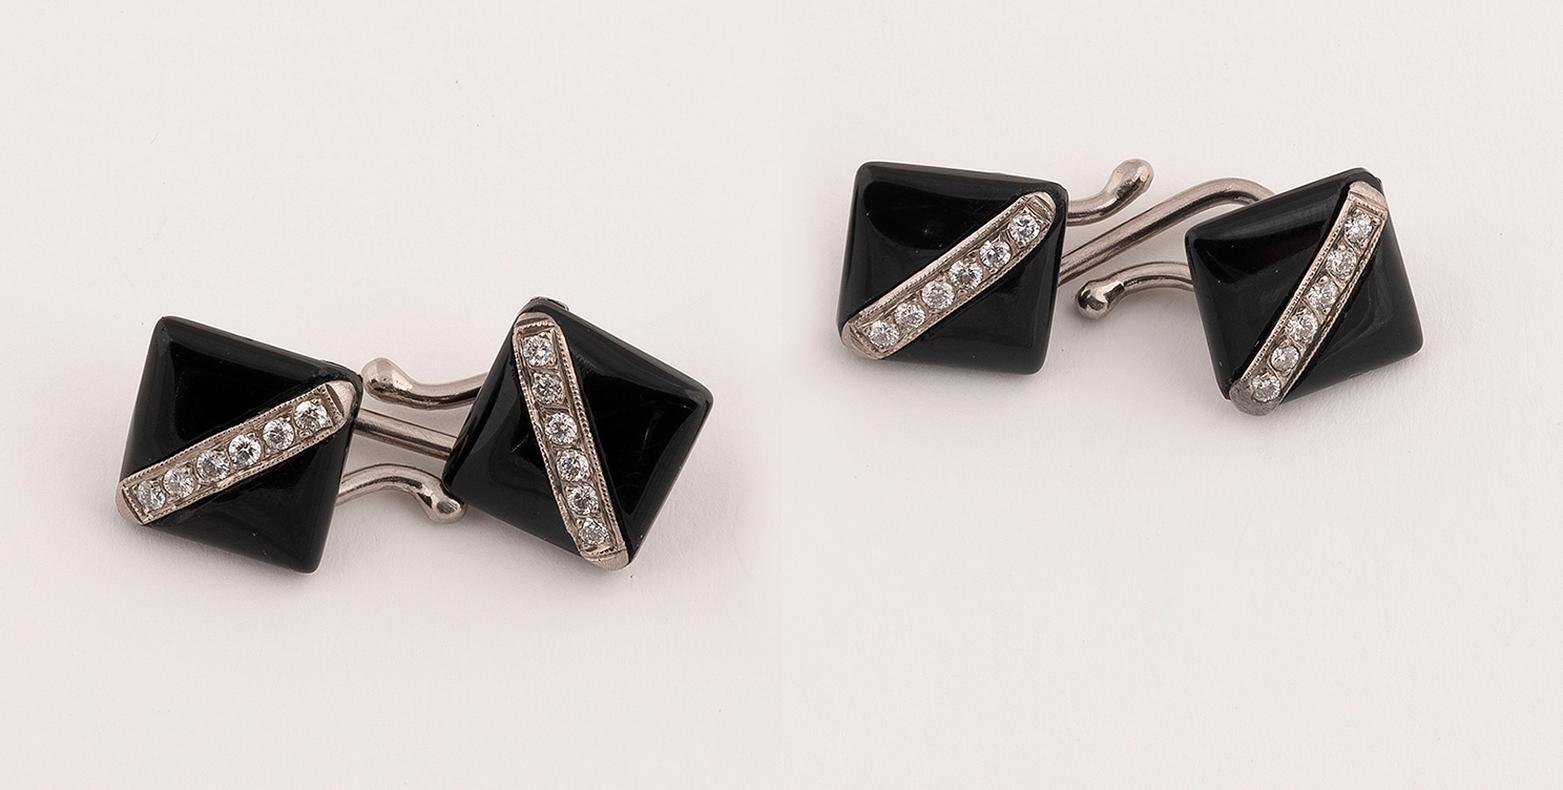 Double-sided, each of square form, set with row of diamonds, between polished onyx plaques.